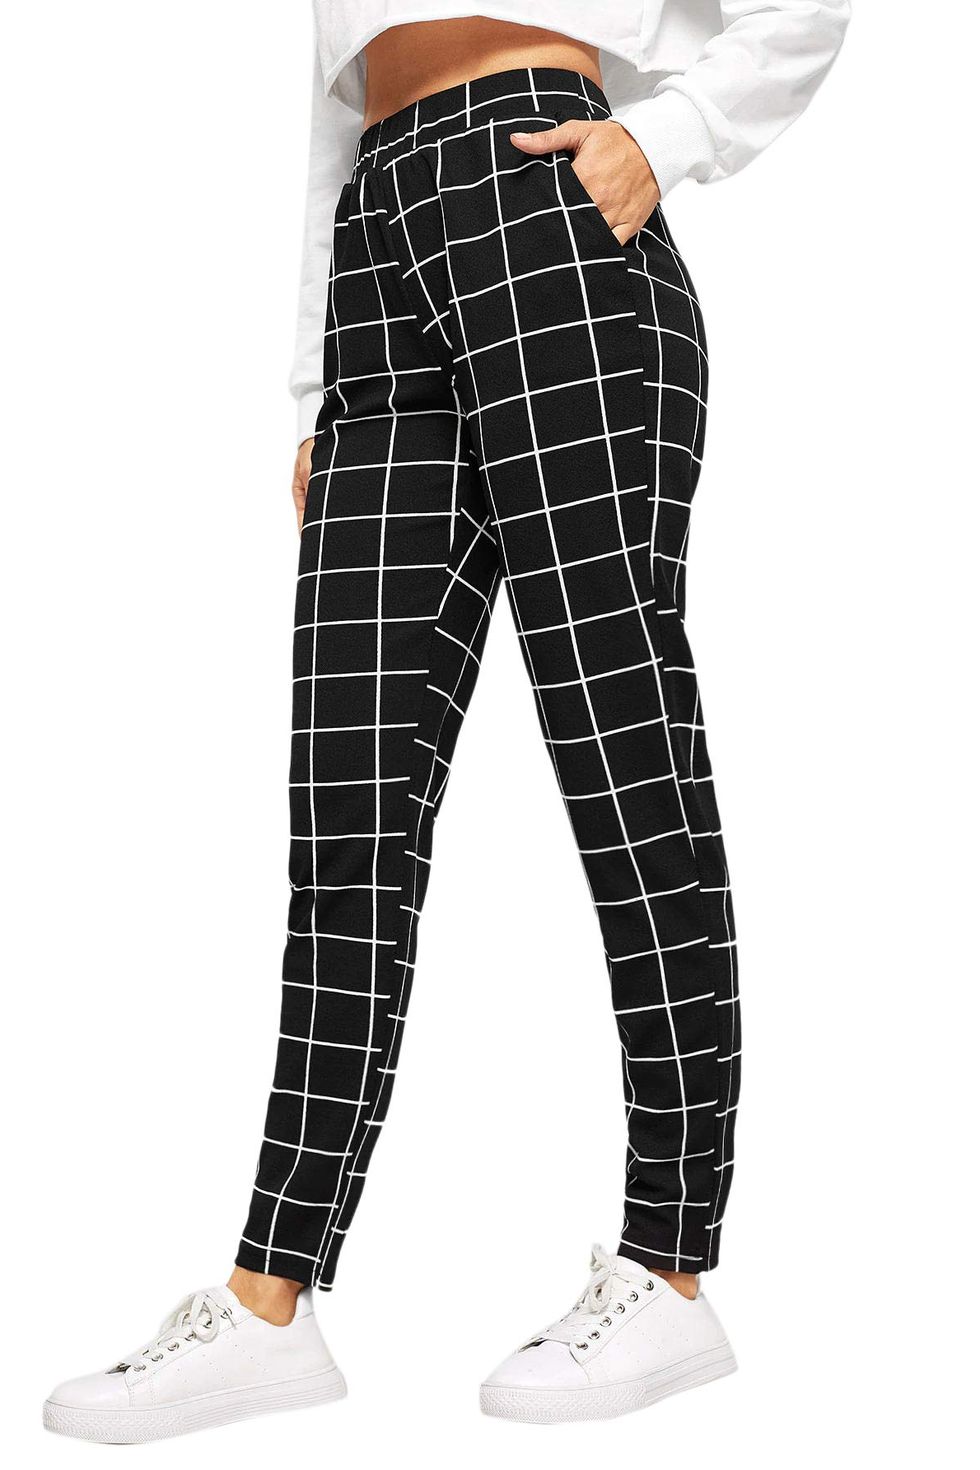 Tartan Plaid Casual Pants Womens Pants High Waisted Mid Rise Bootcut Jeans  for Women Womens Comfortable Work Pants, Black, Small : :  Clothing, Shoes & Accessories